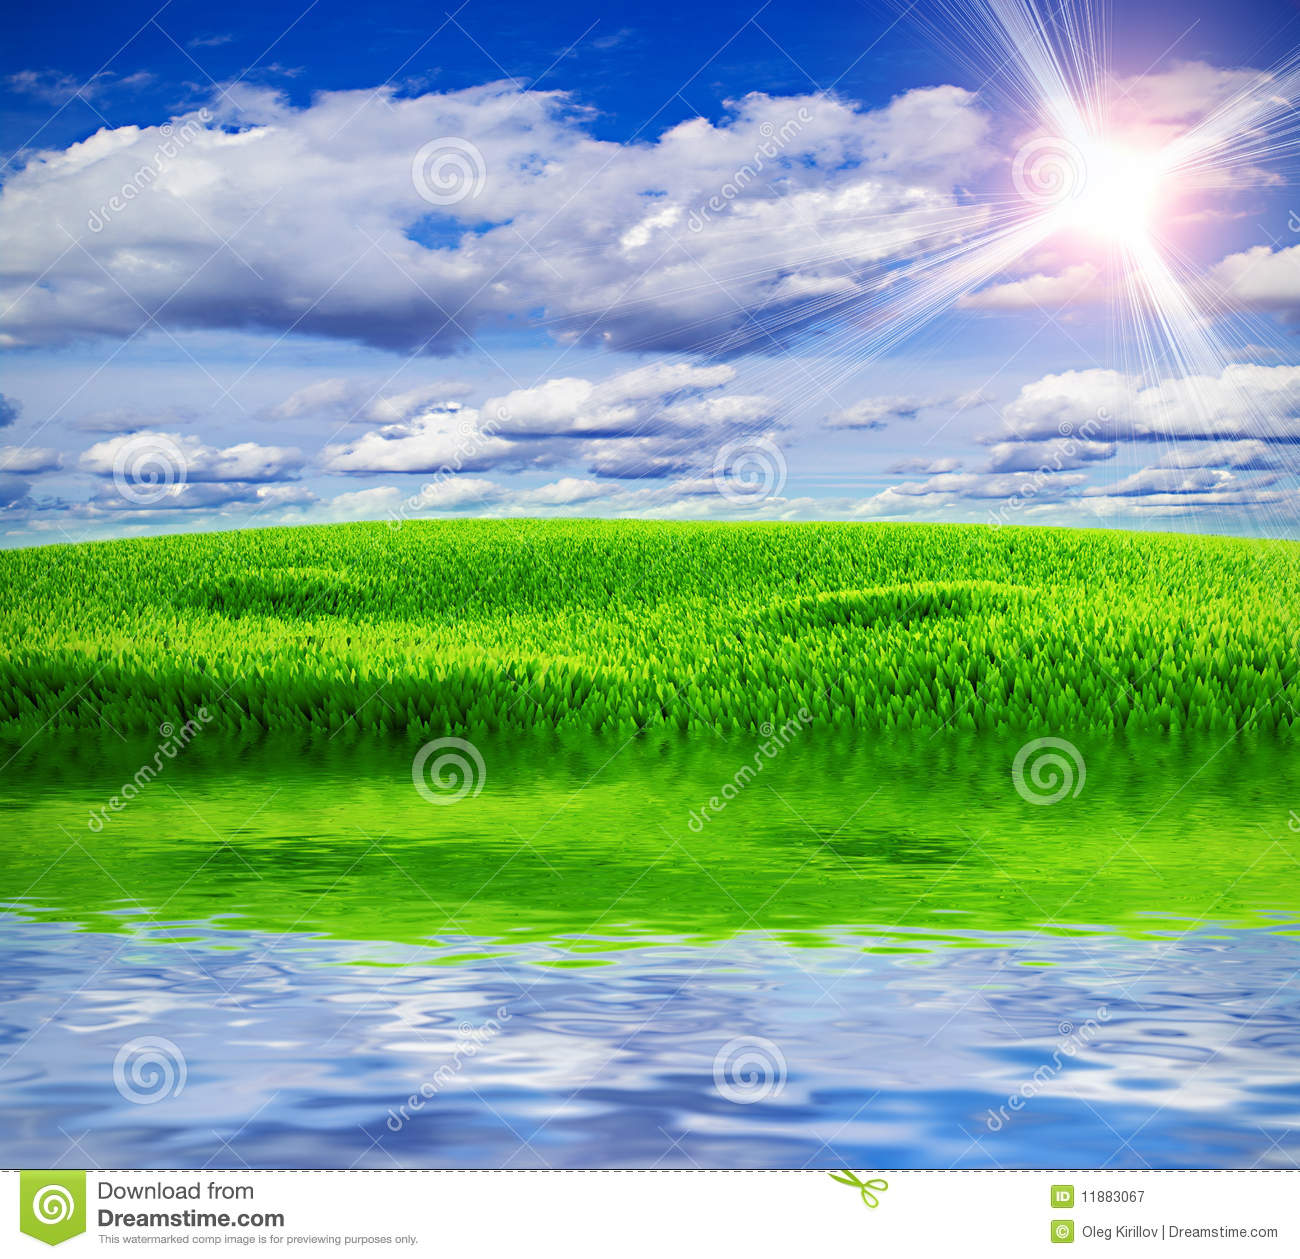 Beautiful Nature Clipart Royalty Free Stock Photography   Image